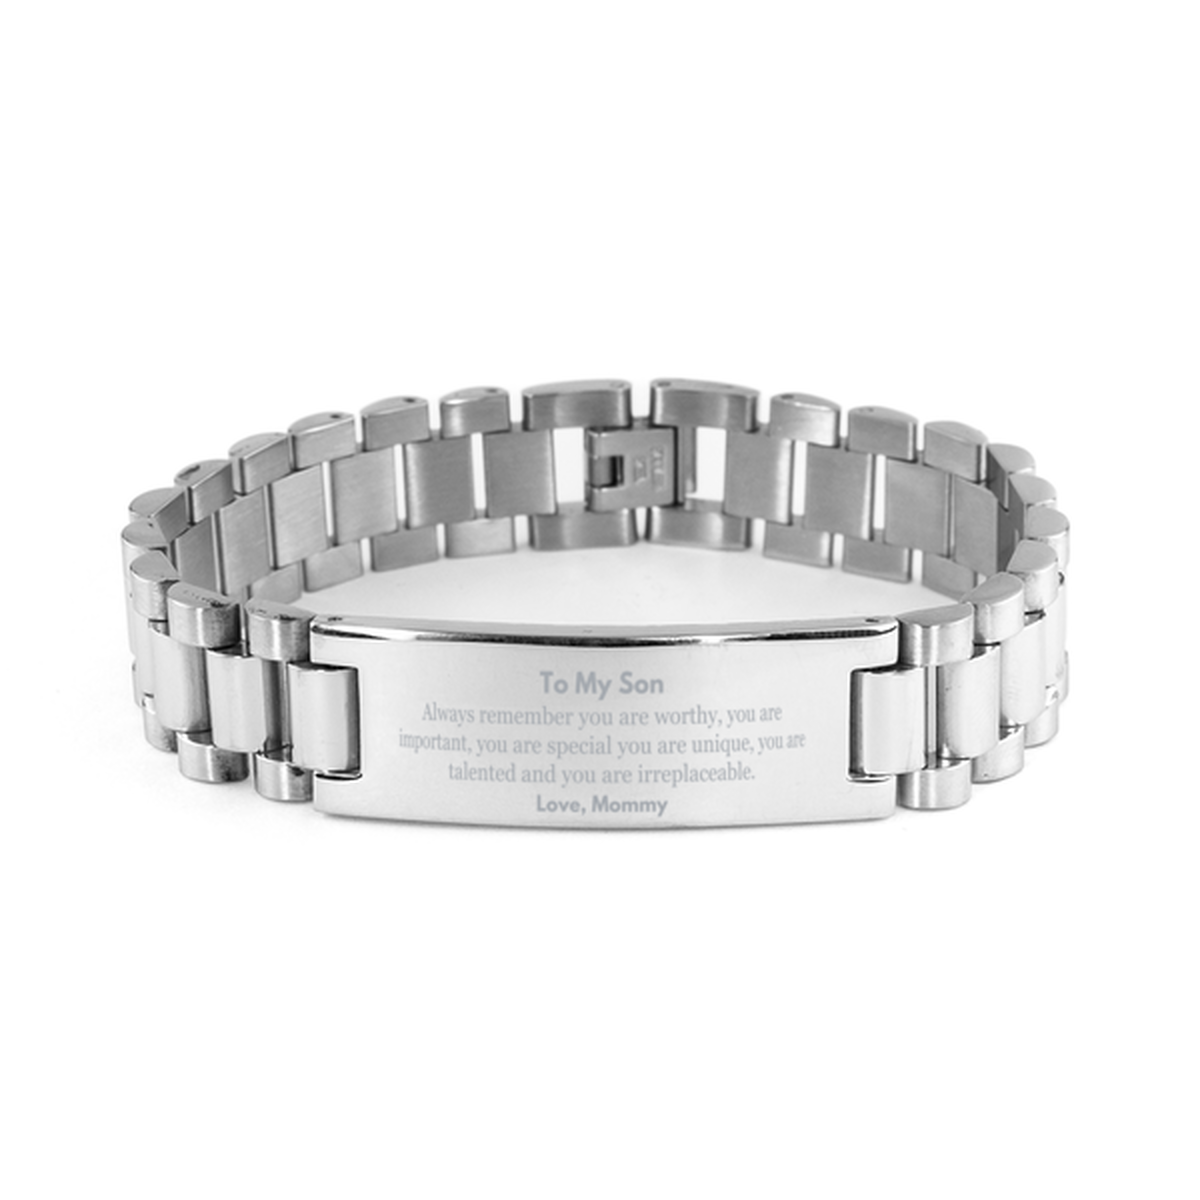 Son Birthday Gifts from Mommy, Inspirational Ladder Stainless Steel Bracelet for Son Christmas Graduation Gifts for Son Always remember you are worthy, you are important. Love, Mommy